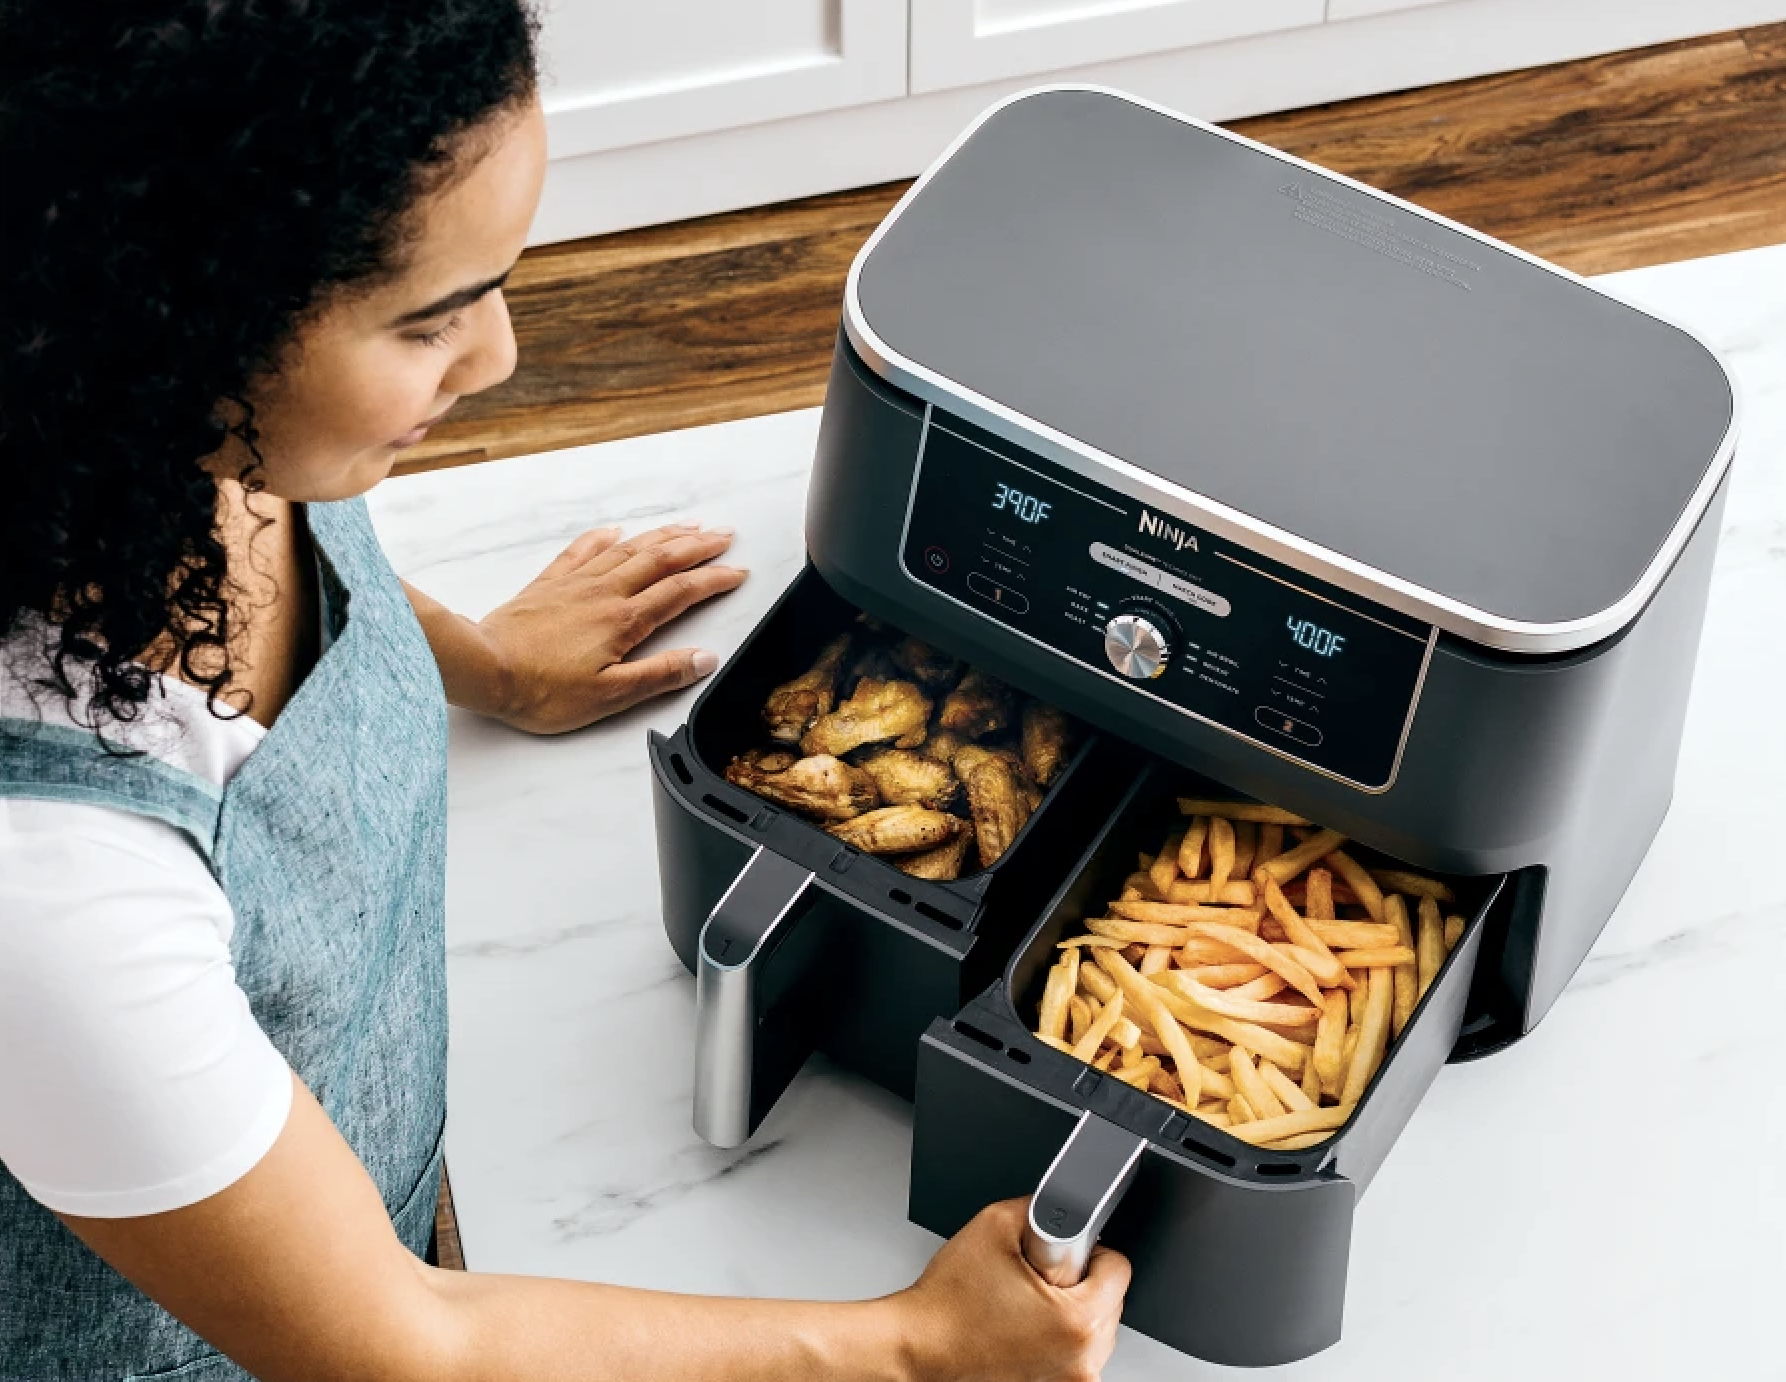 The air fryer with chicken fingers in one basket and fries in the other